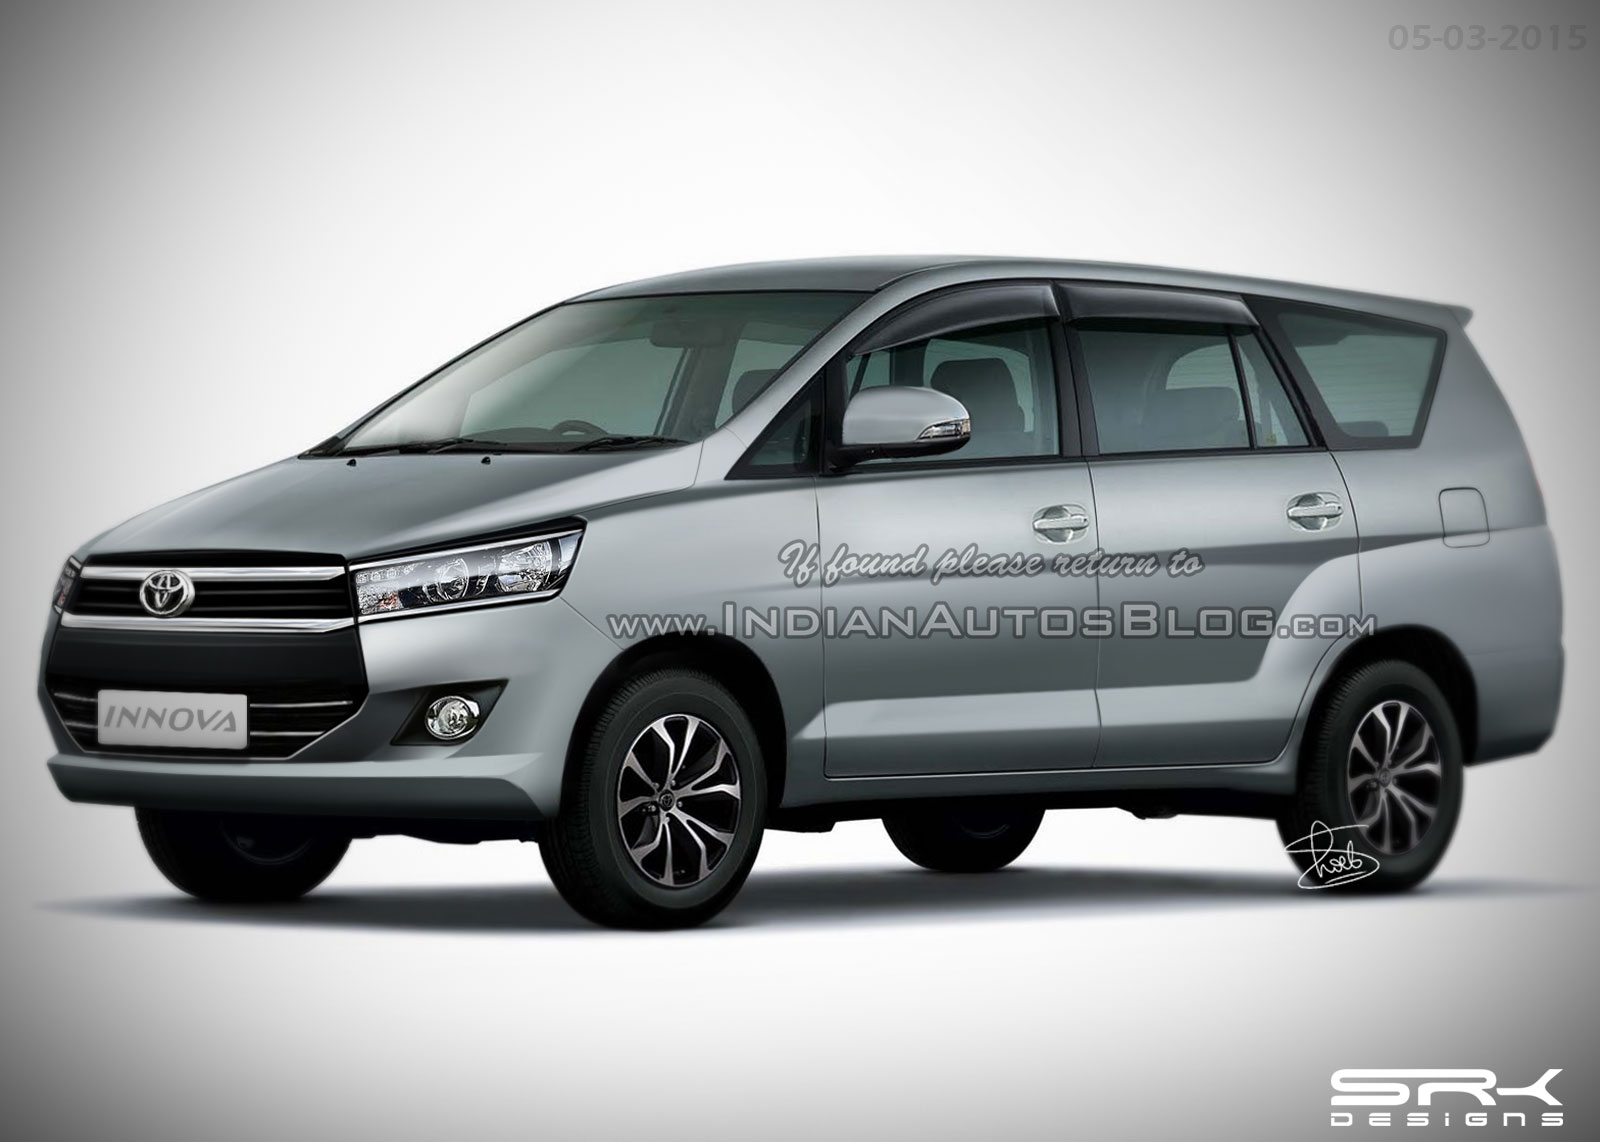 2016 Toyota Innova To Launch In Thailand In Q3 2015